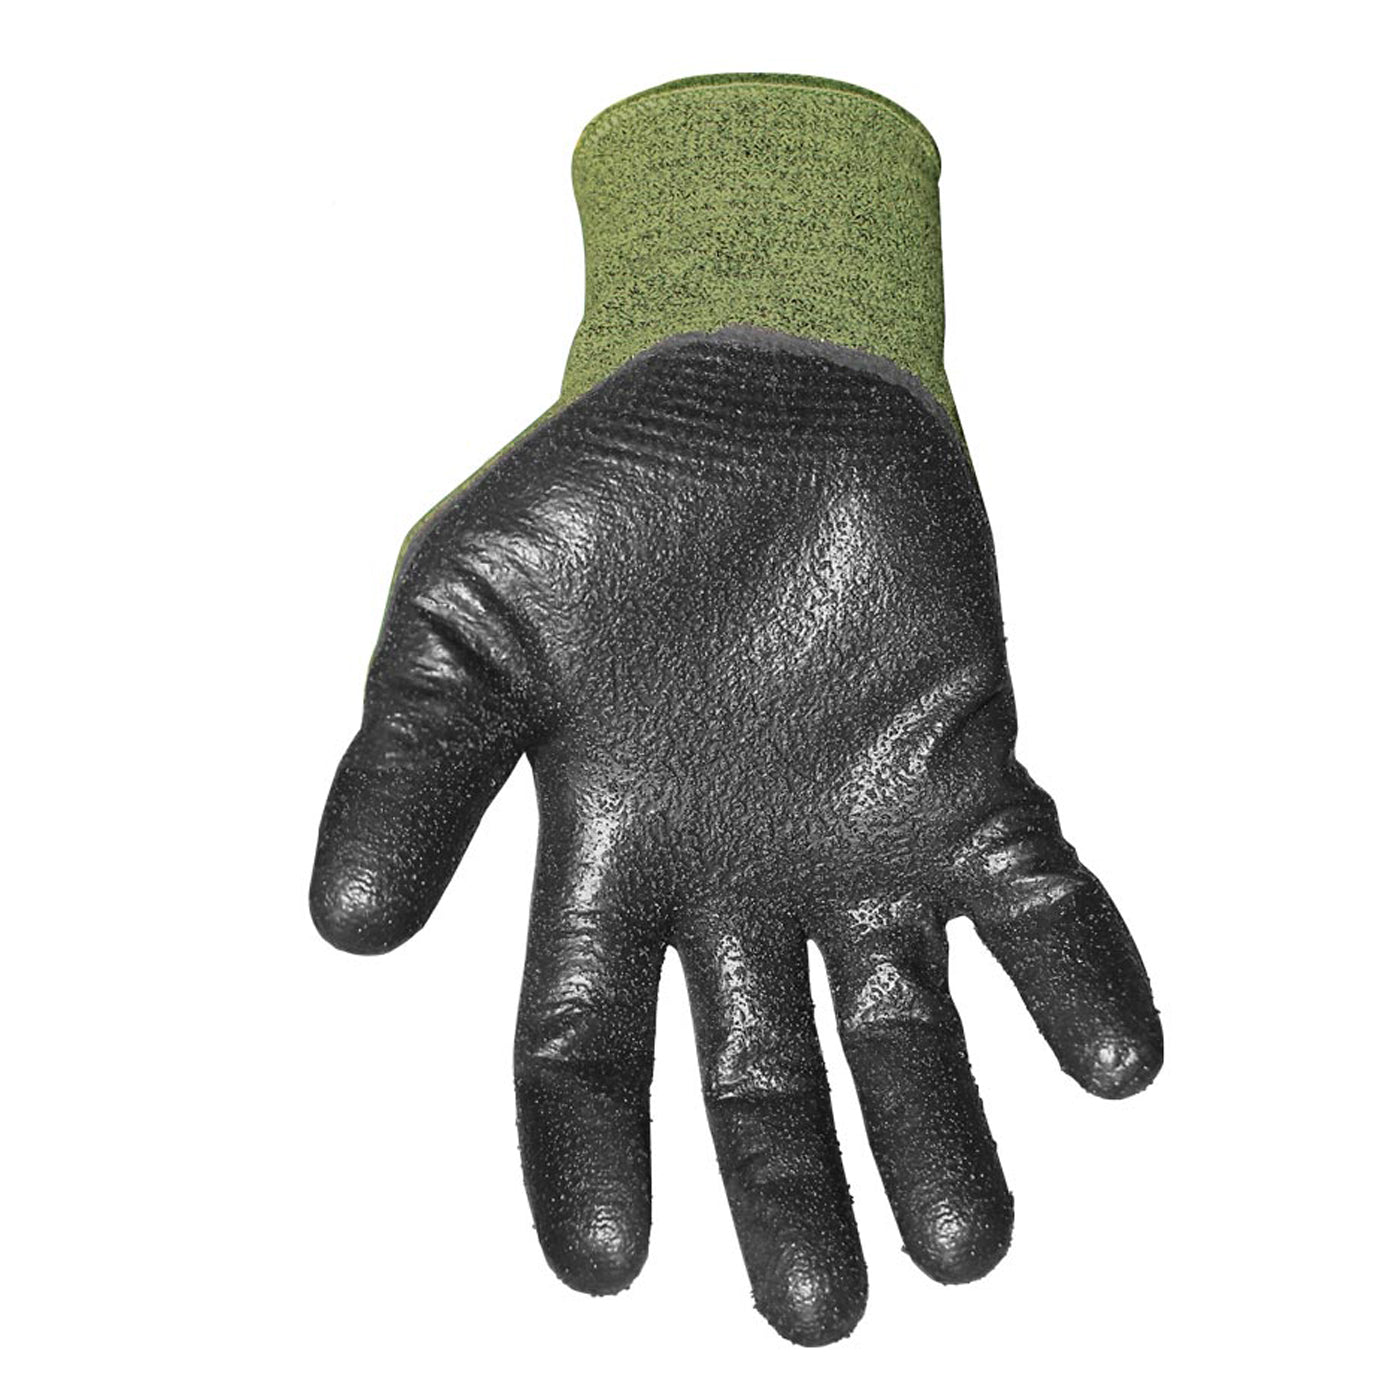 12-4000-60 Youngstown FR 4000 Glove - Main image